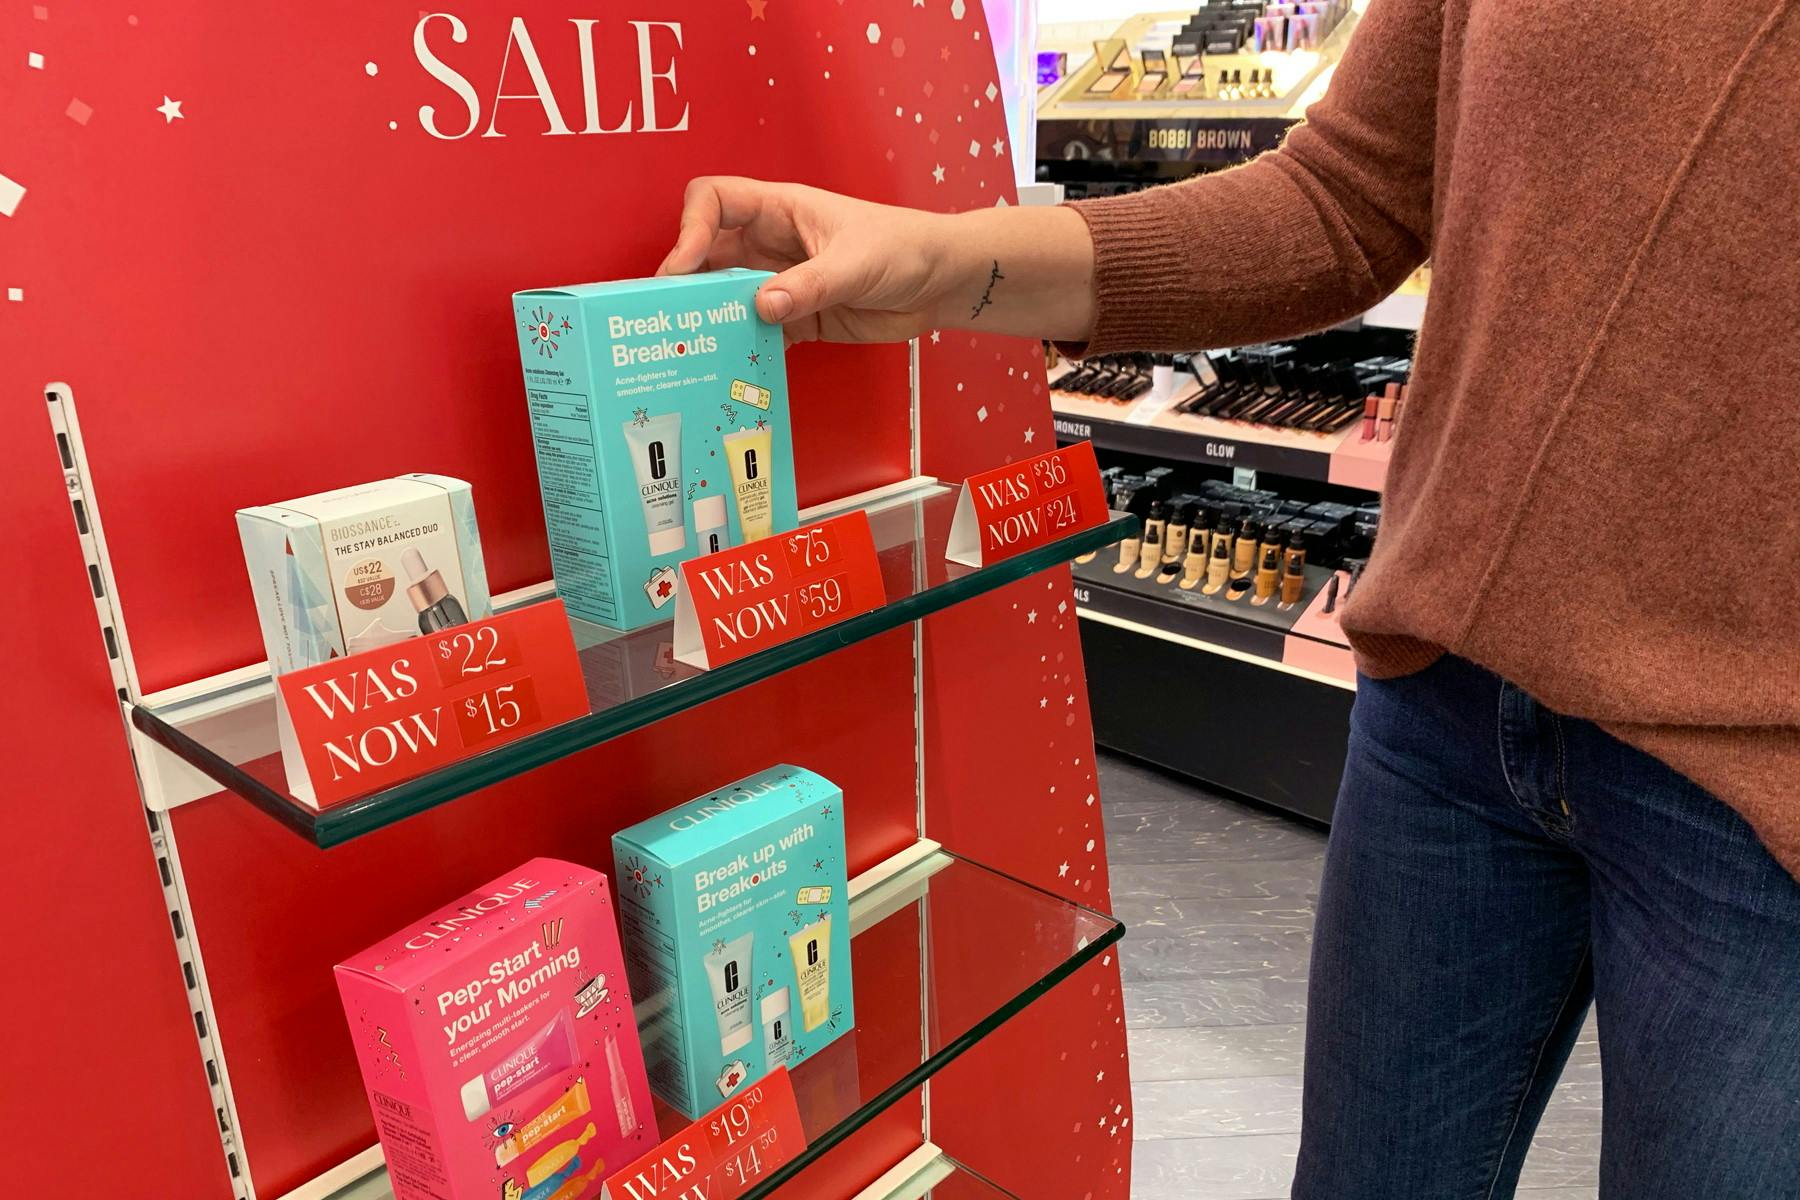 A person reaching to take a product from a sale shelf in Sephora.